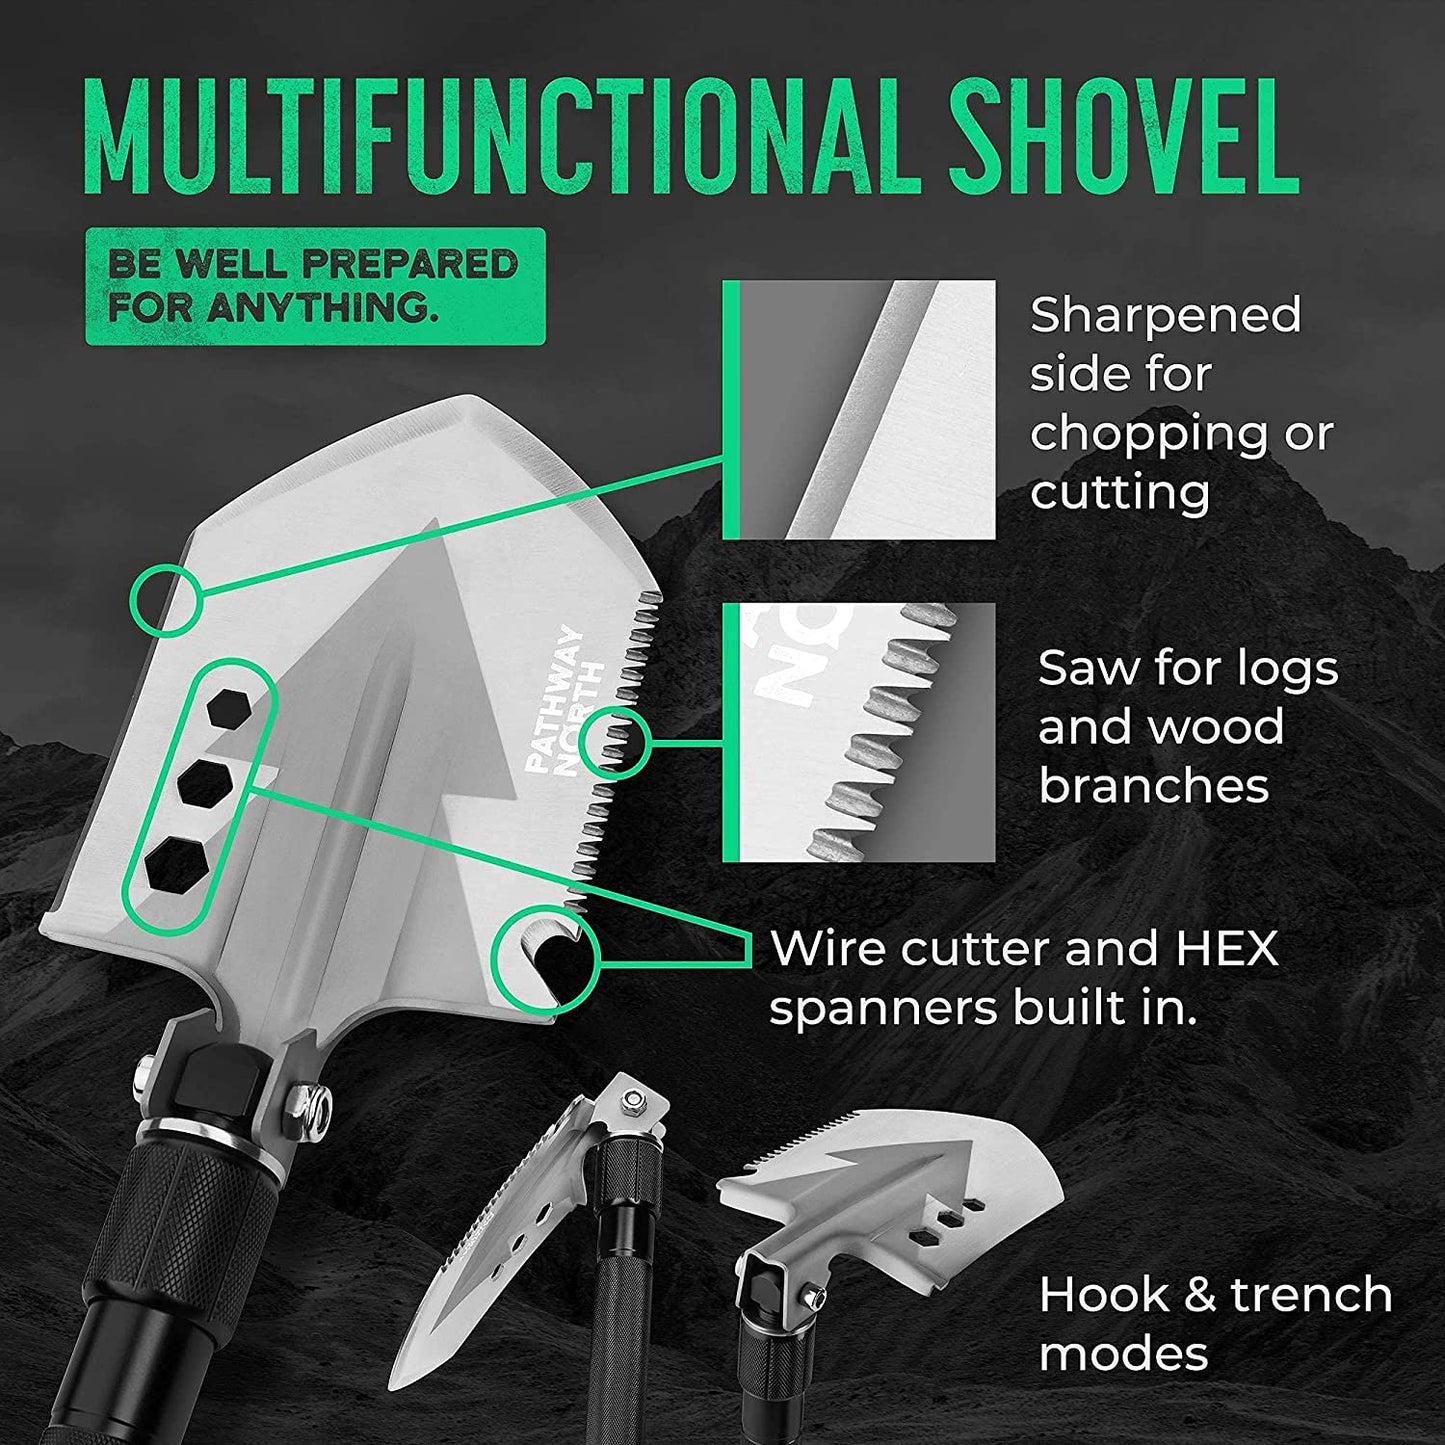 Survival Shovel and Camping Axe – Stainless Steel Tactical, Survival Multi-Tool and Survival Hatchet Equipment for Outdoor Hiking Camping Gear, Hunting, Backpacking Emergency Kit(Black)